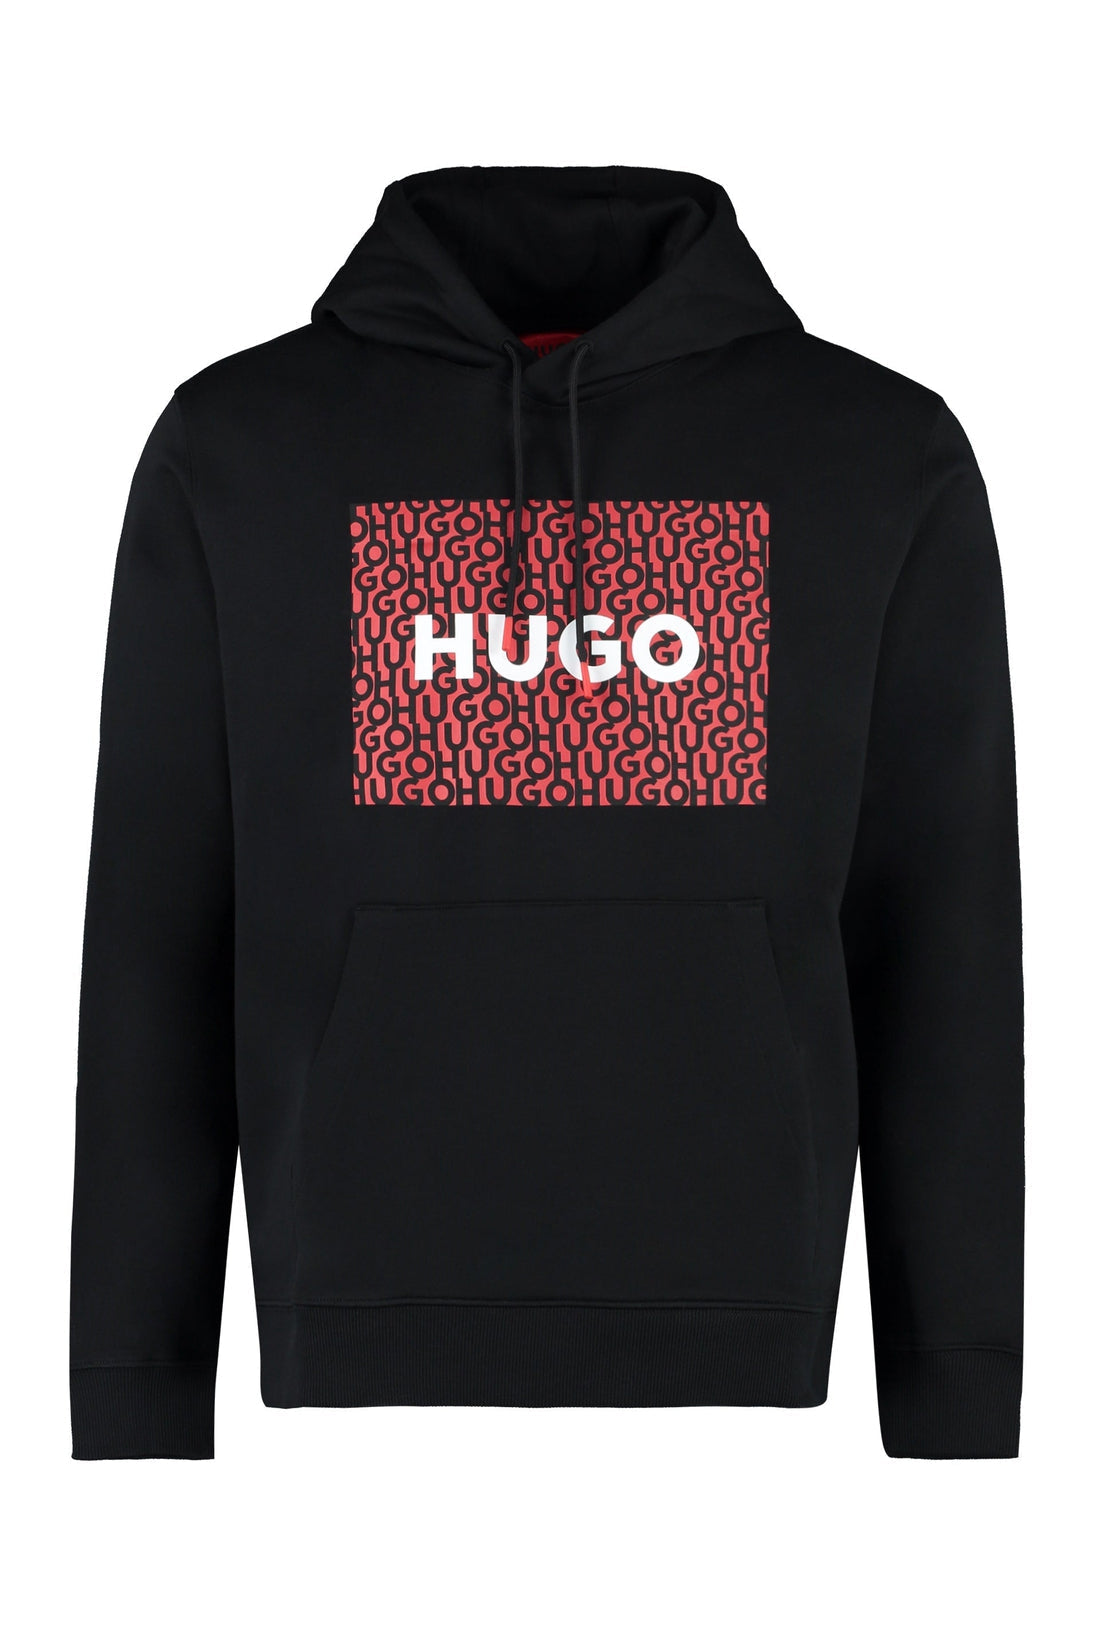 BOSS-OUTLET-SALE-Printed hoodie-ARCHIVIST